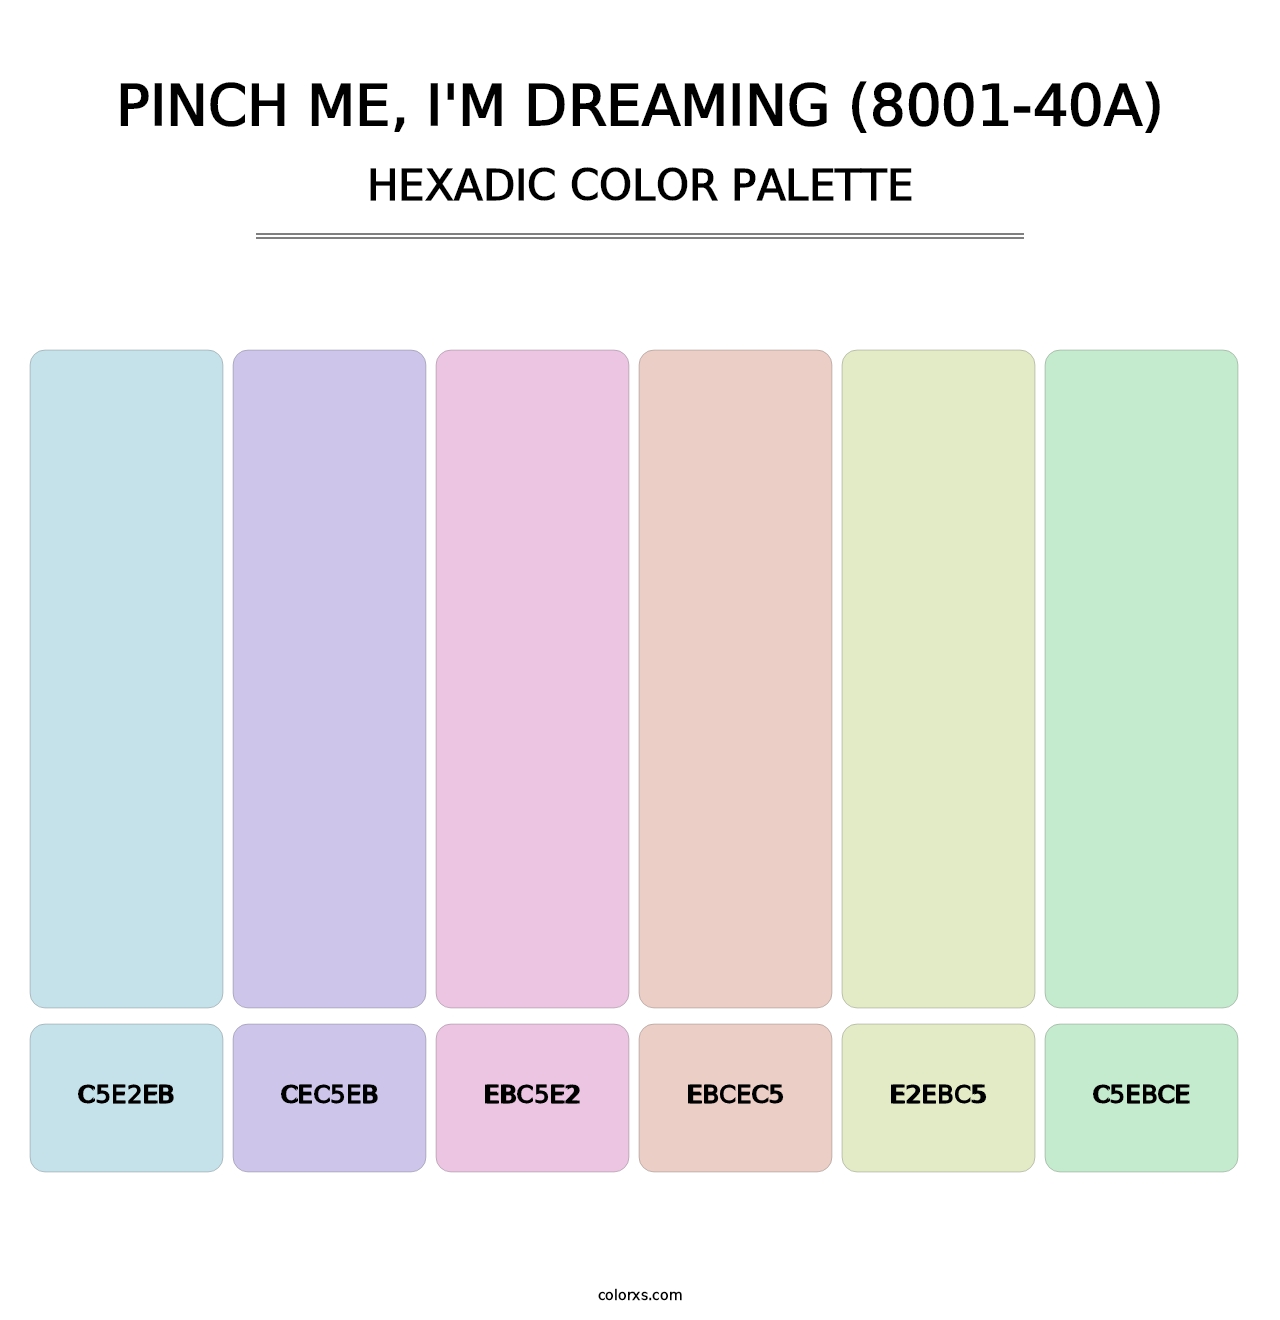 Pinch Me, I'm Dreaming (8001-40A) - Hexadic Color Palette